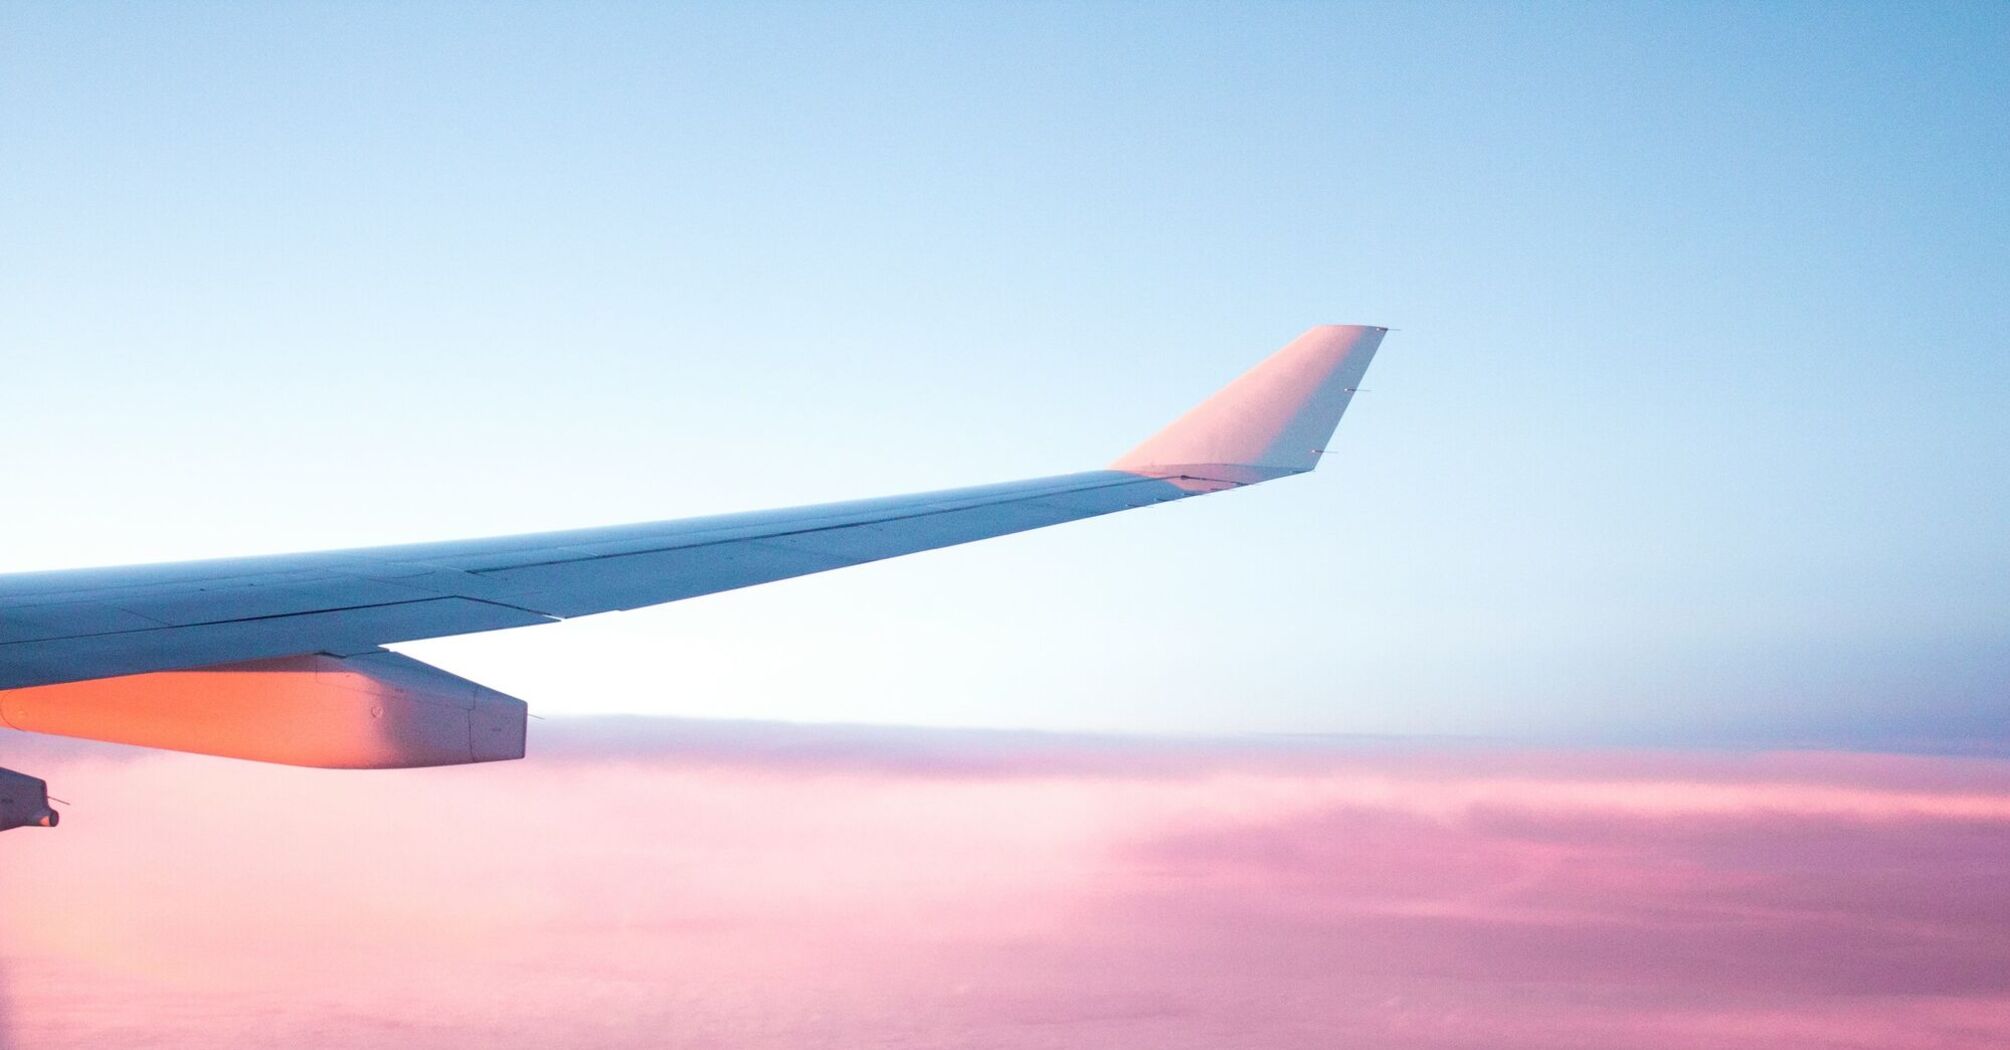 View of an airplane wing against a pink-hued sky during sunset